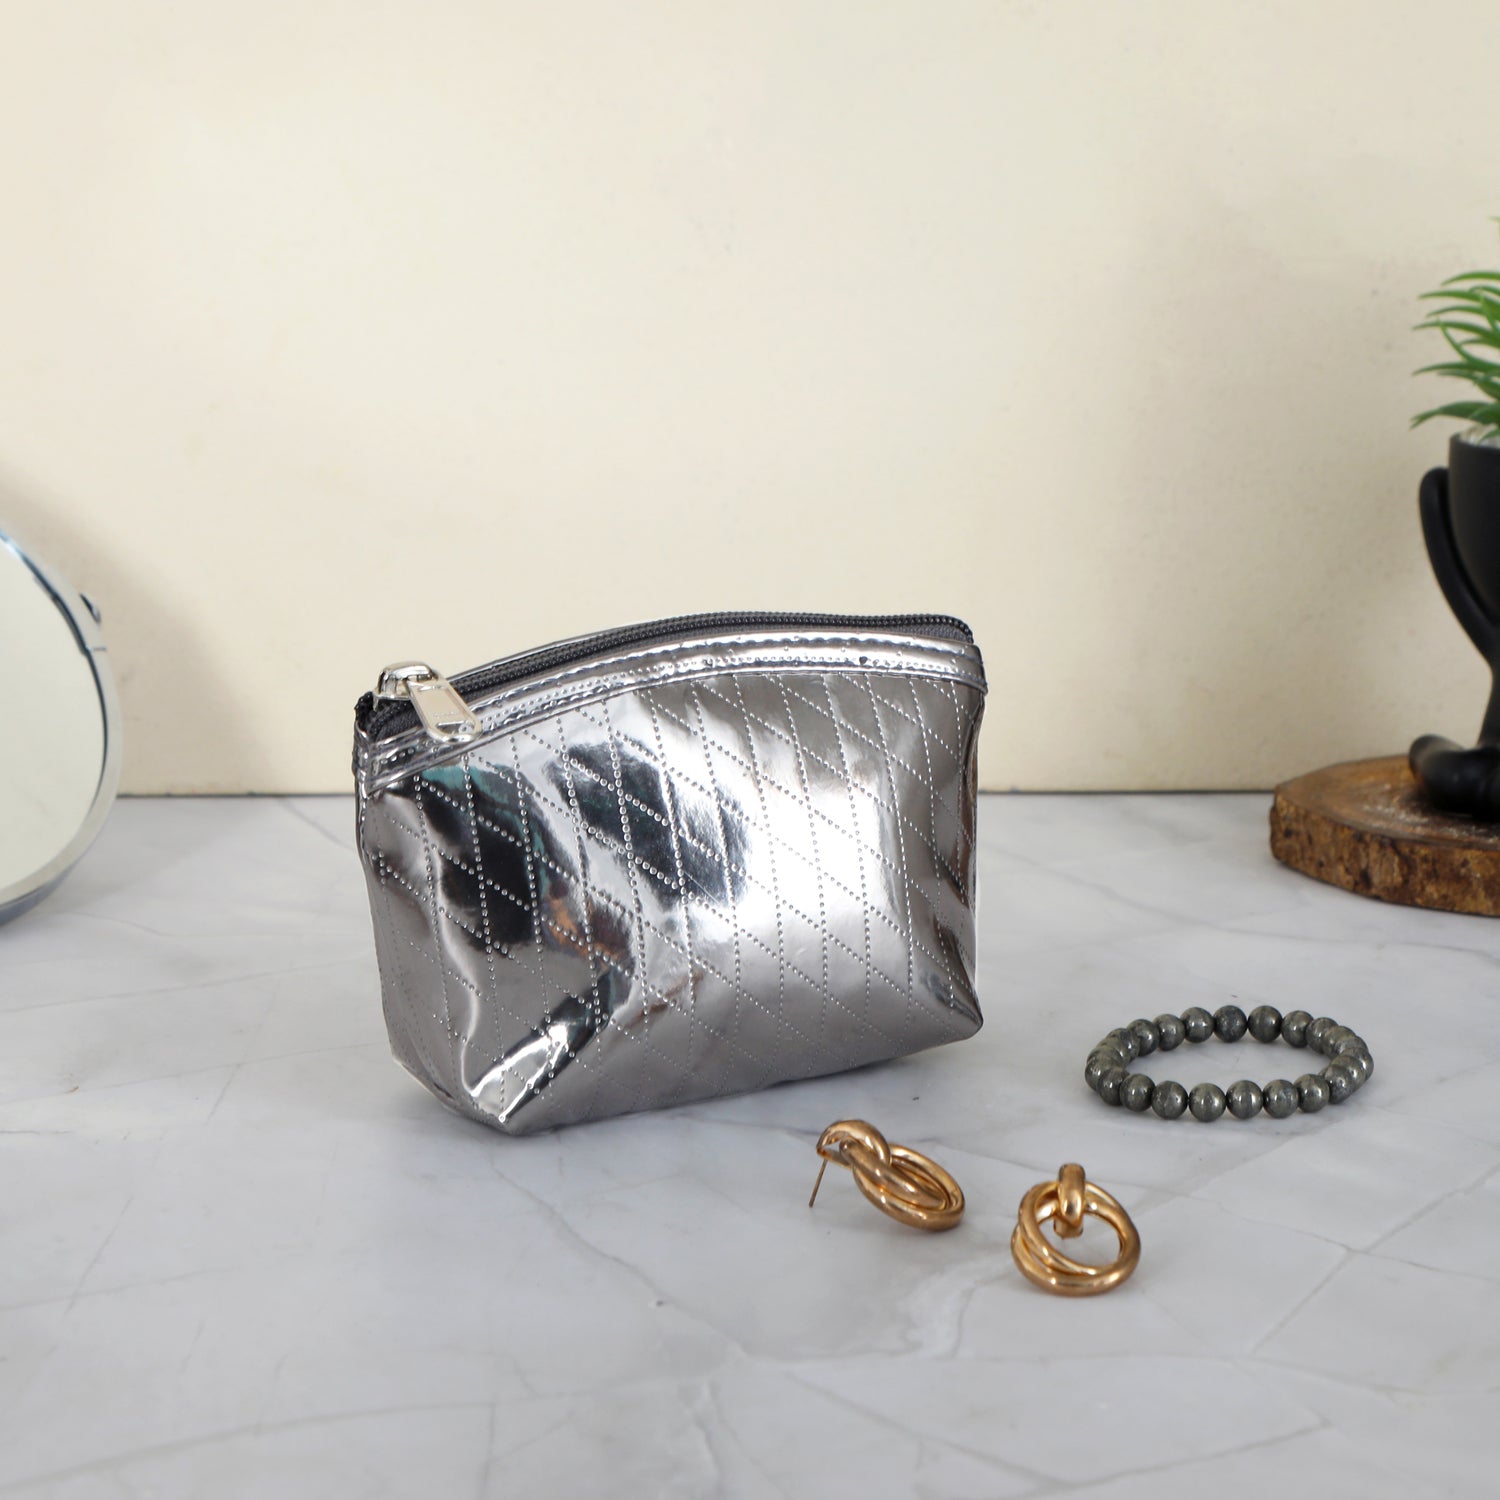 Travel Pouch - Silver Travel Pouches - Set of 3 Pouches